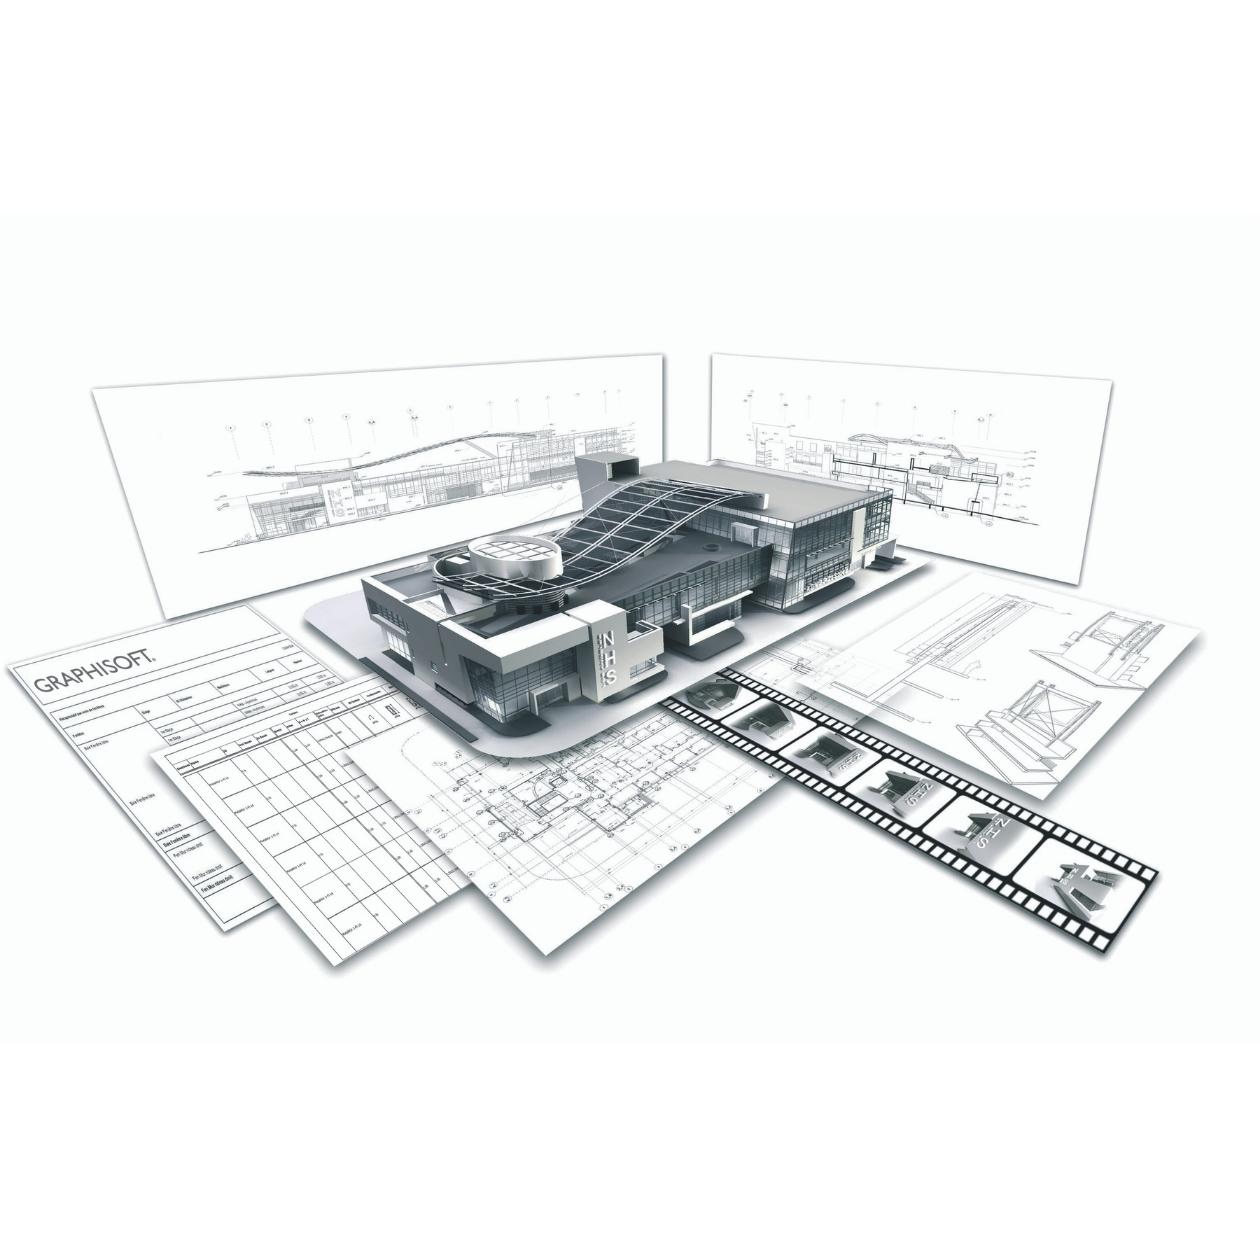 The virtual building Archicad